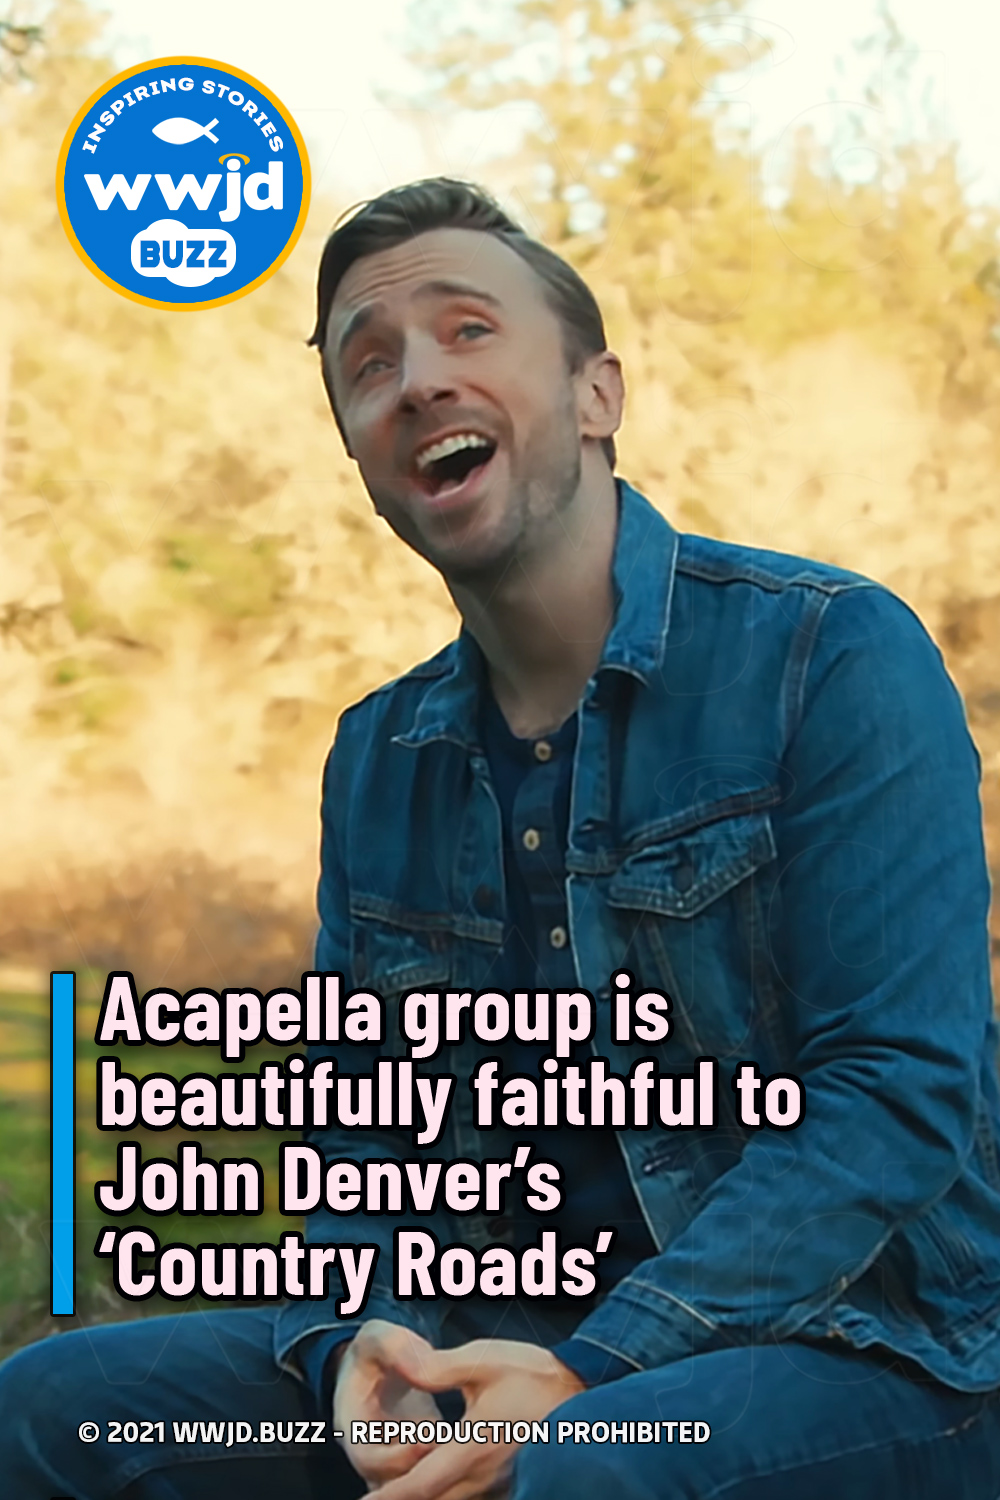 Acapella group is beautifully faithful to John Denver’s ‘Country Roads’